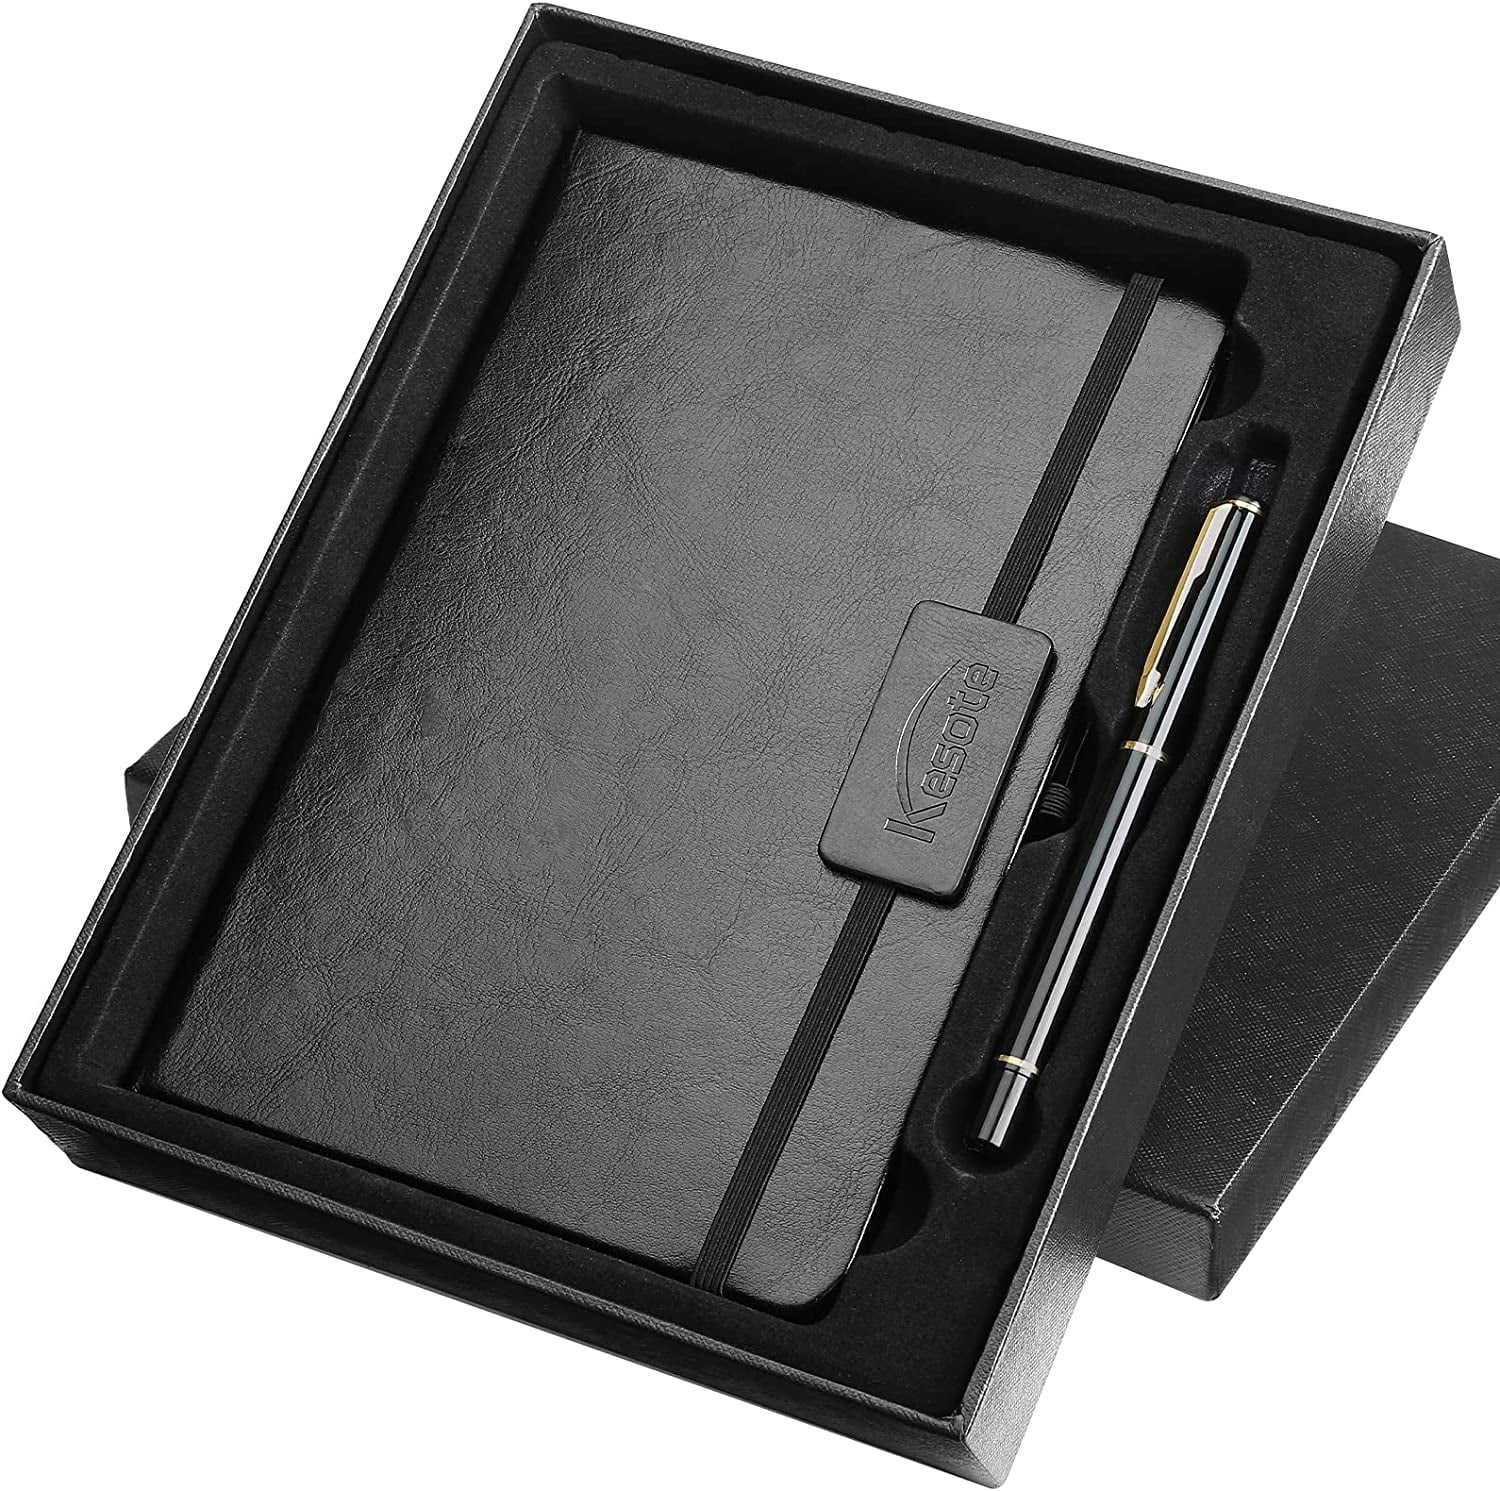 Naler A5 Journal Notebook with Pen Set & Gift Box,Classic Ruled Hardcover  Lined Paper Journal,Black